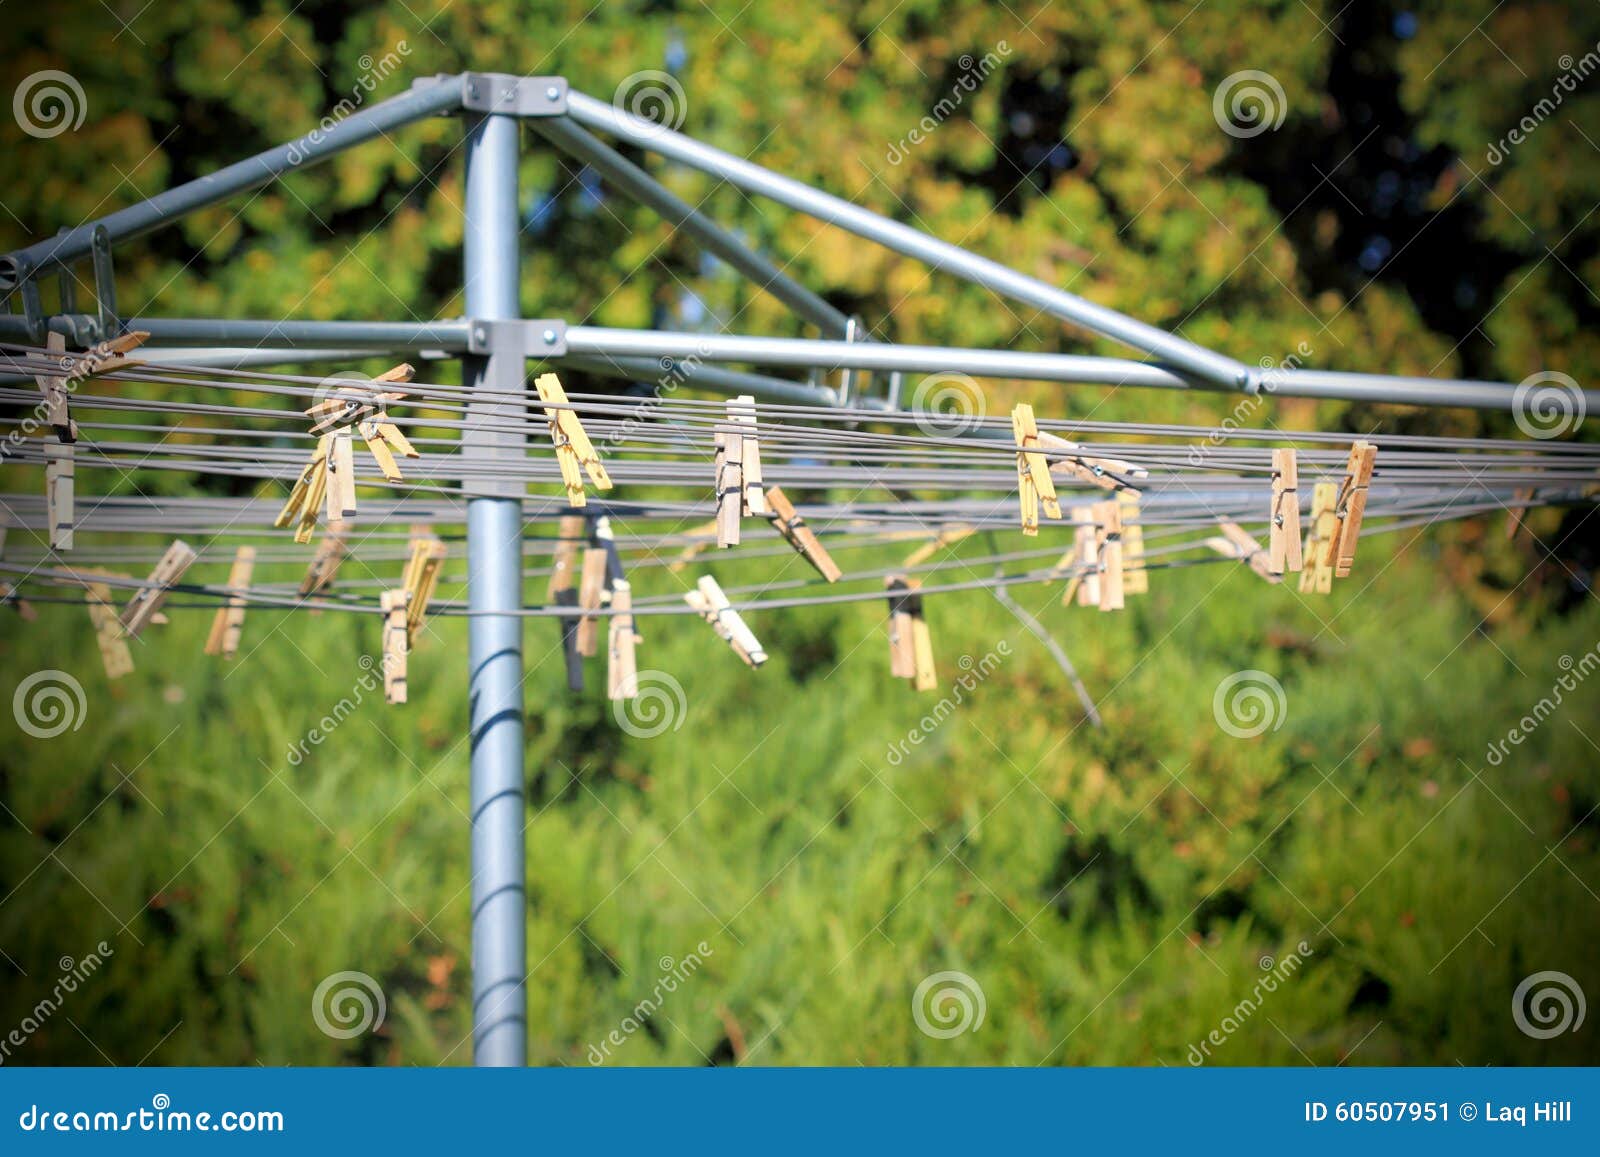 Pins on a Line stock image. Image of bare, shallow, circular